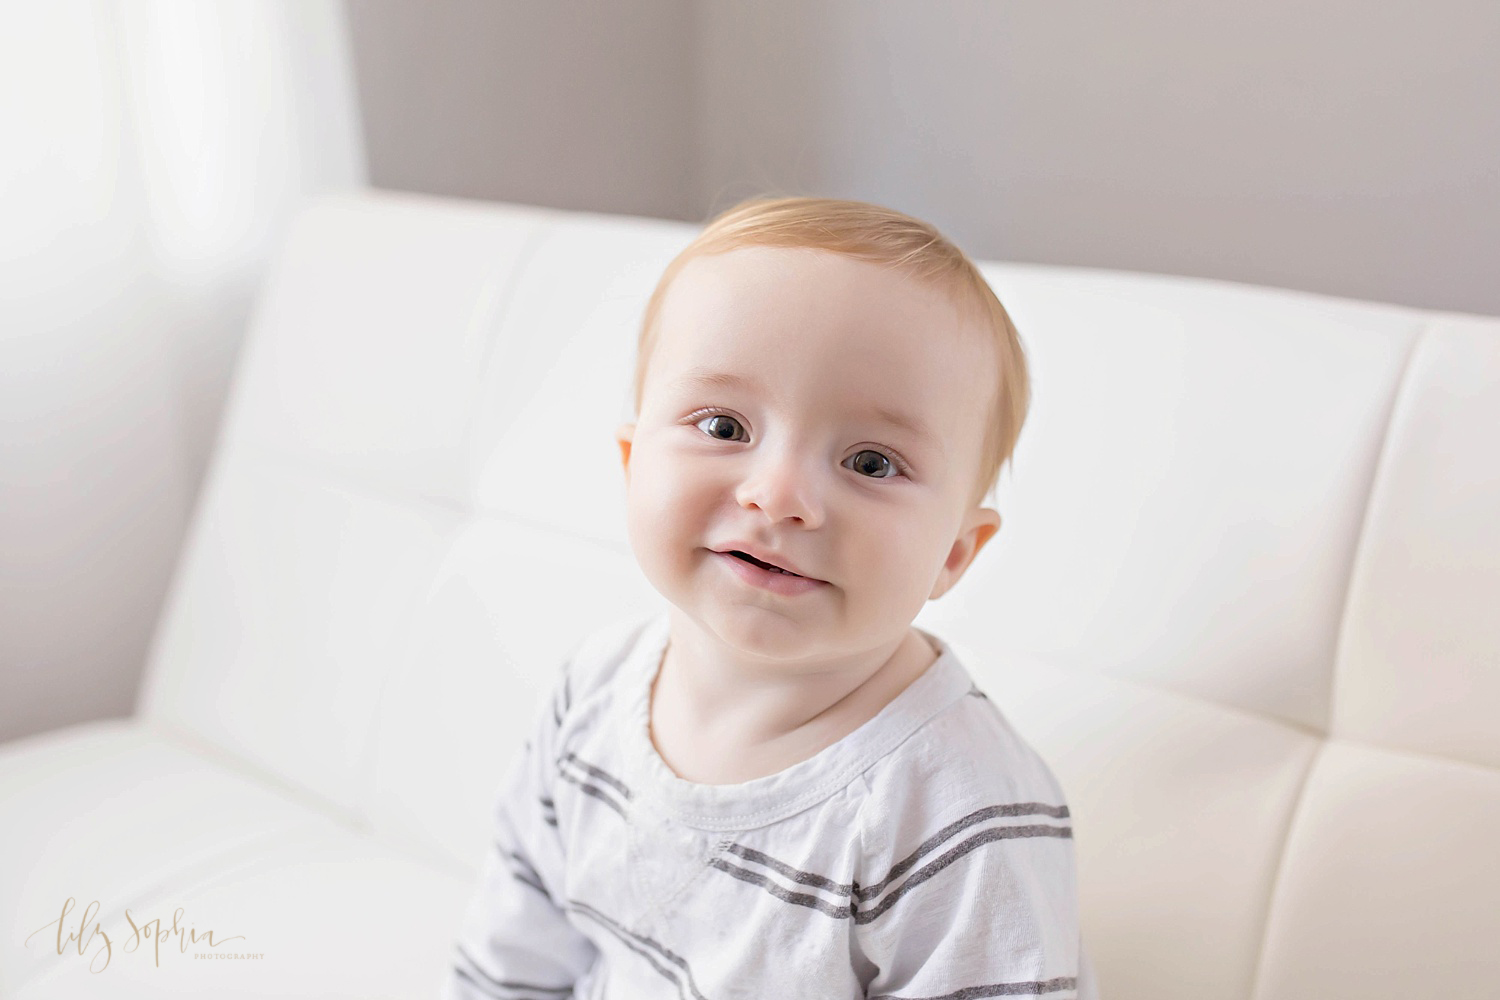  Image of a one year old boy, sitting on a couch and half smiling up at the camera.&nbsp; 